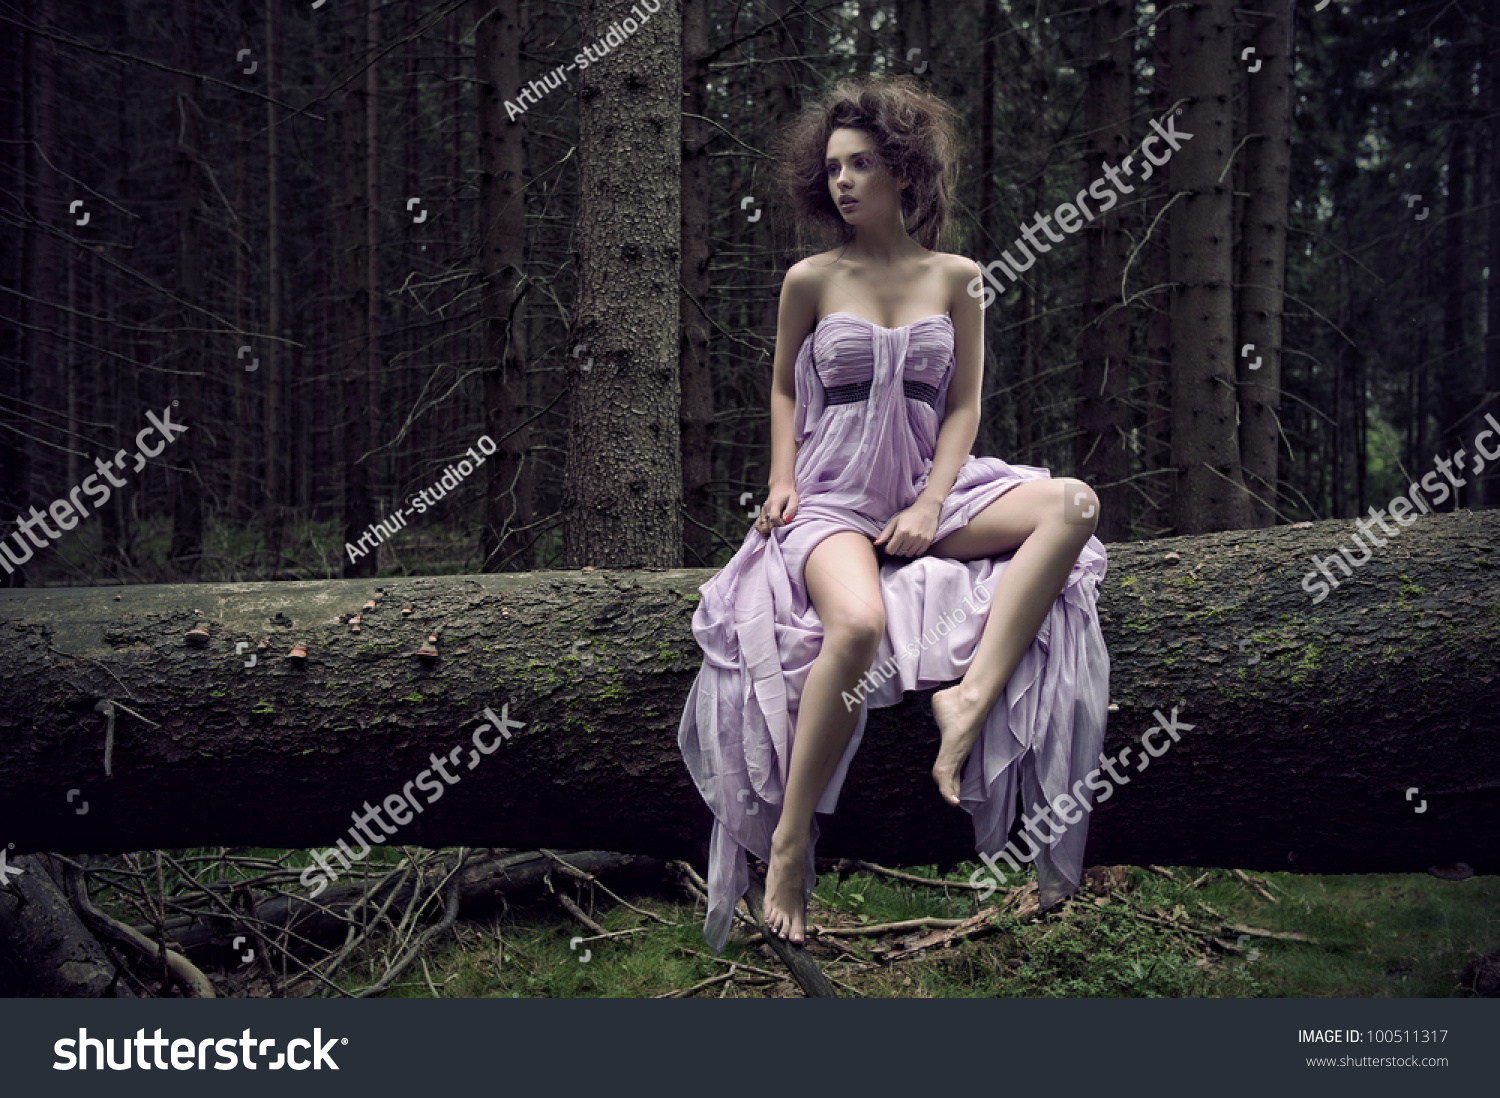 Prevail lukker lufthavn Sexy Woman Nature Scenery Stock Photo (Edit Now) 100511317